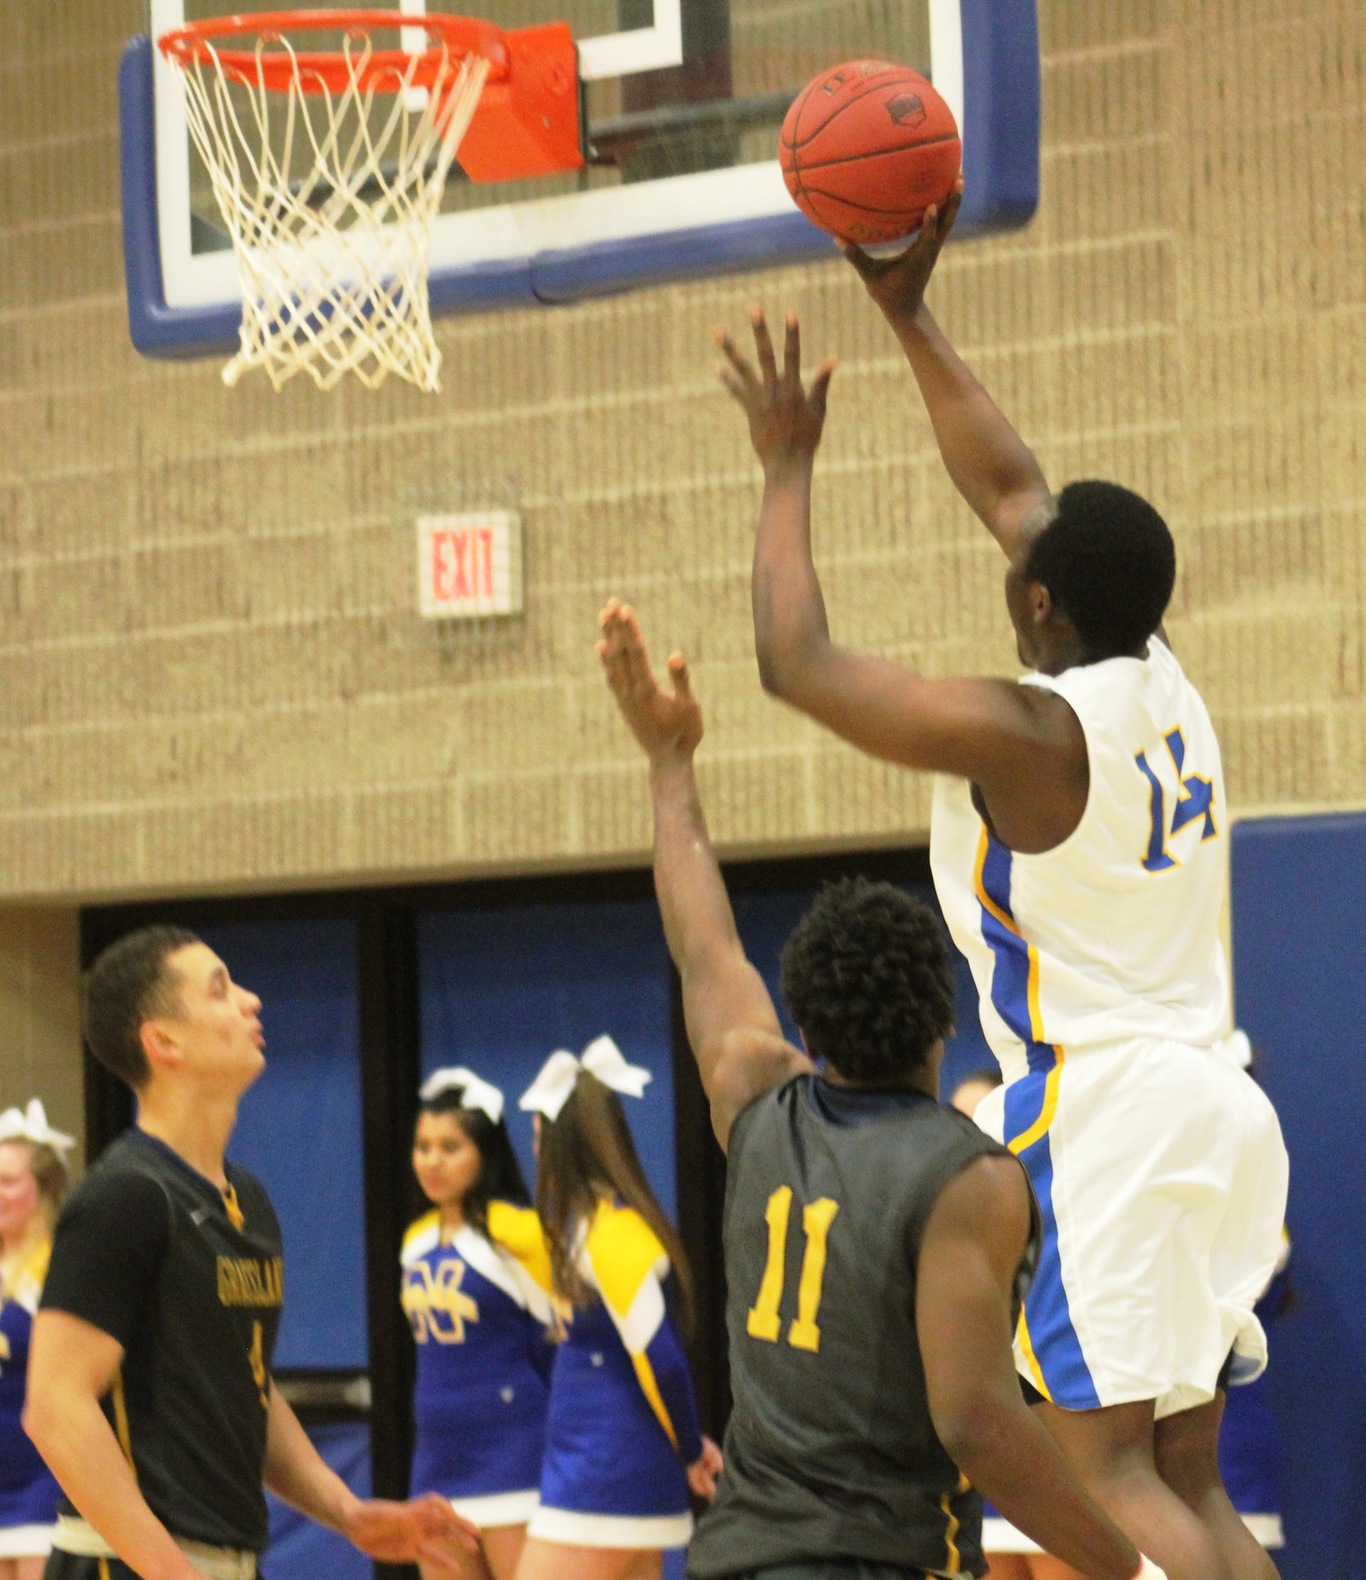 NIACC's David Wanjara scores in the second half of Monday's game.